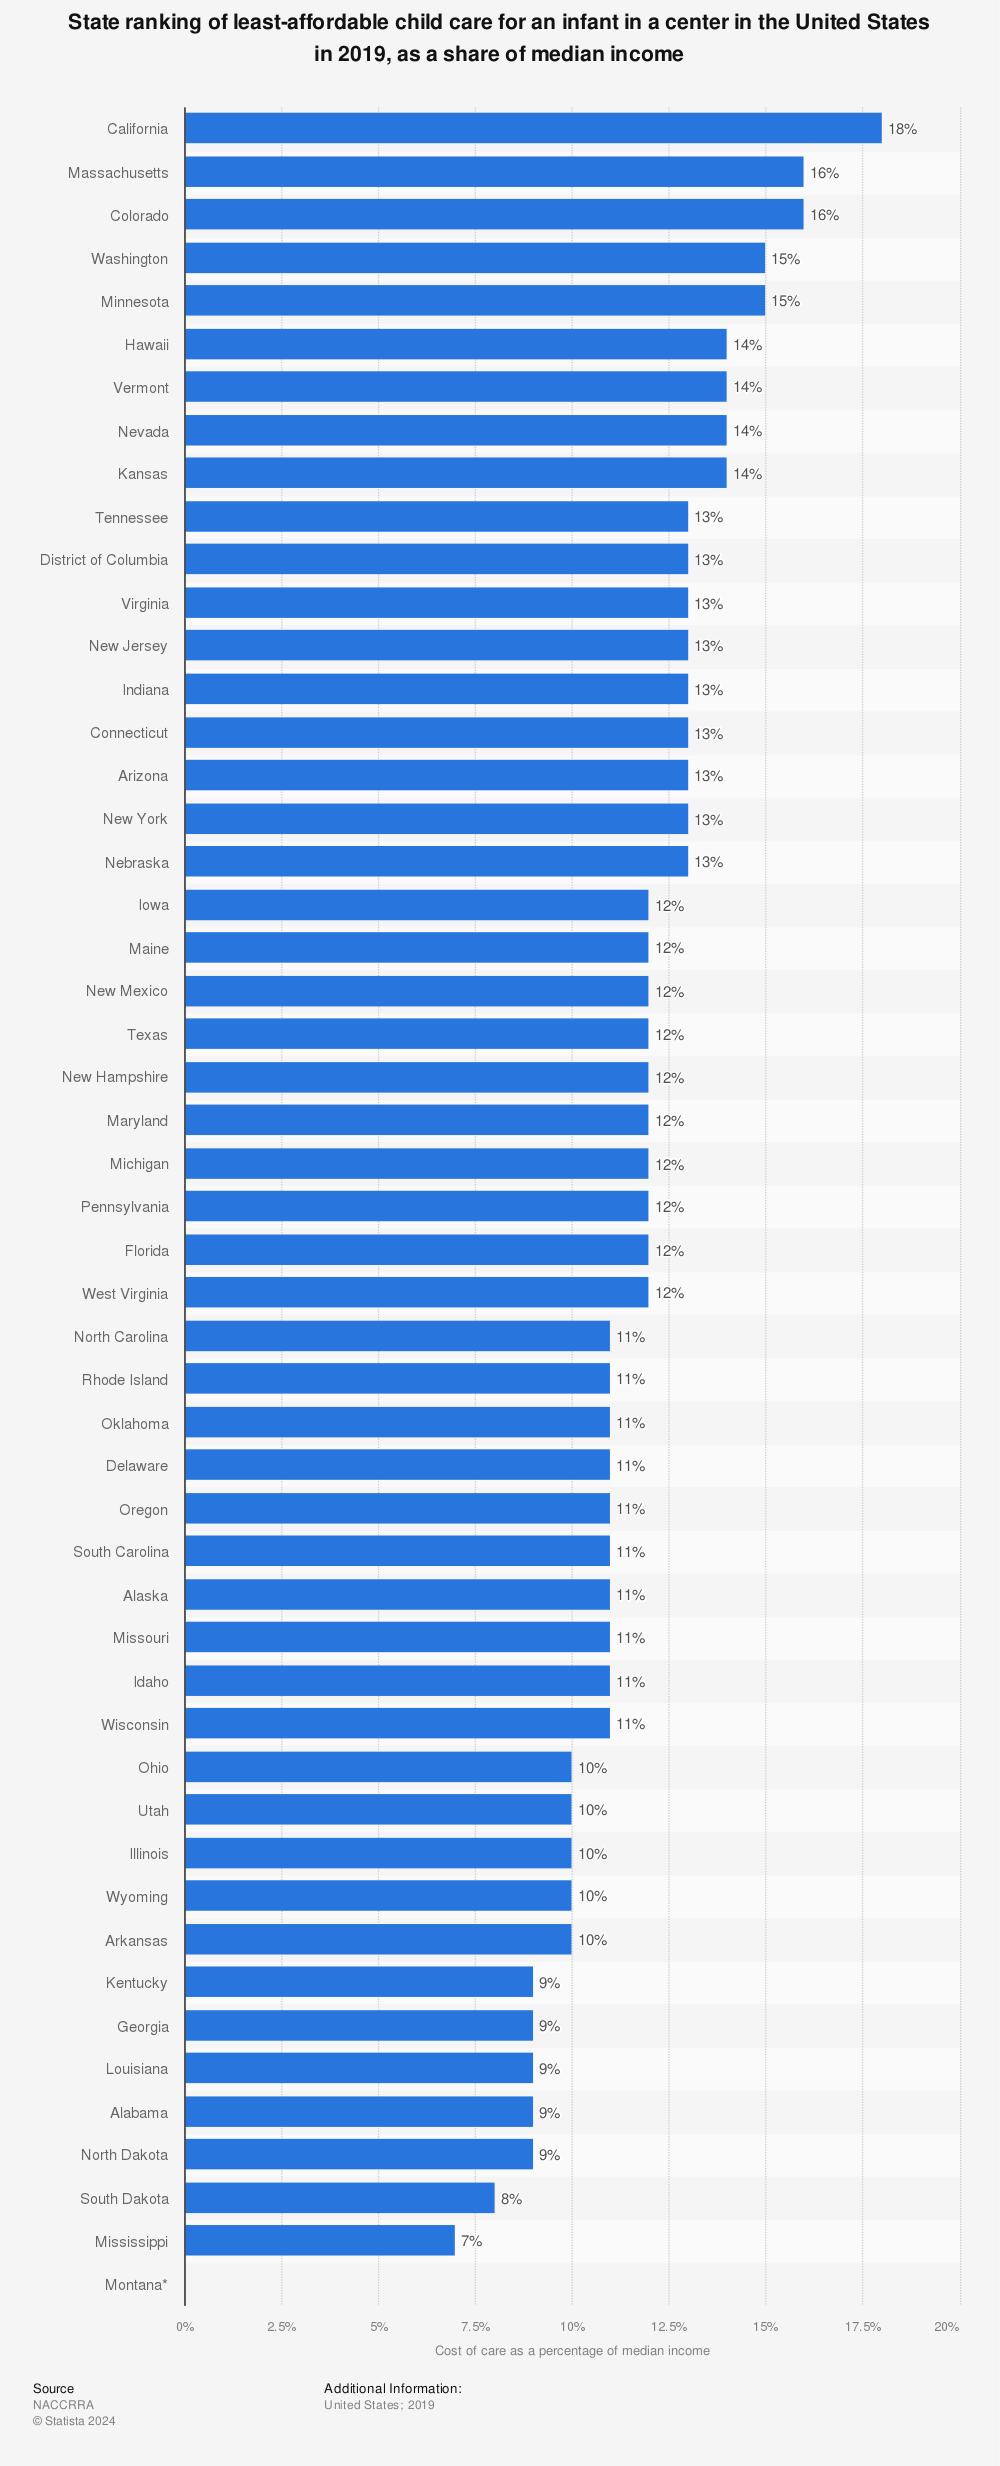 Statistic: State ranking of least-affordable child care for an infant in a center in the United States in 2019, as a share of median income | Statista